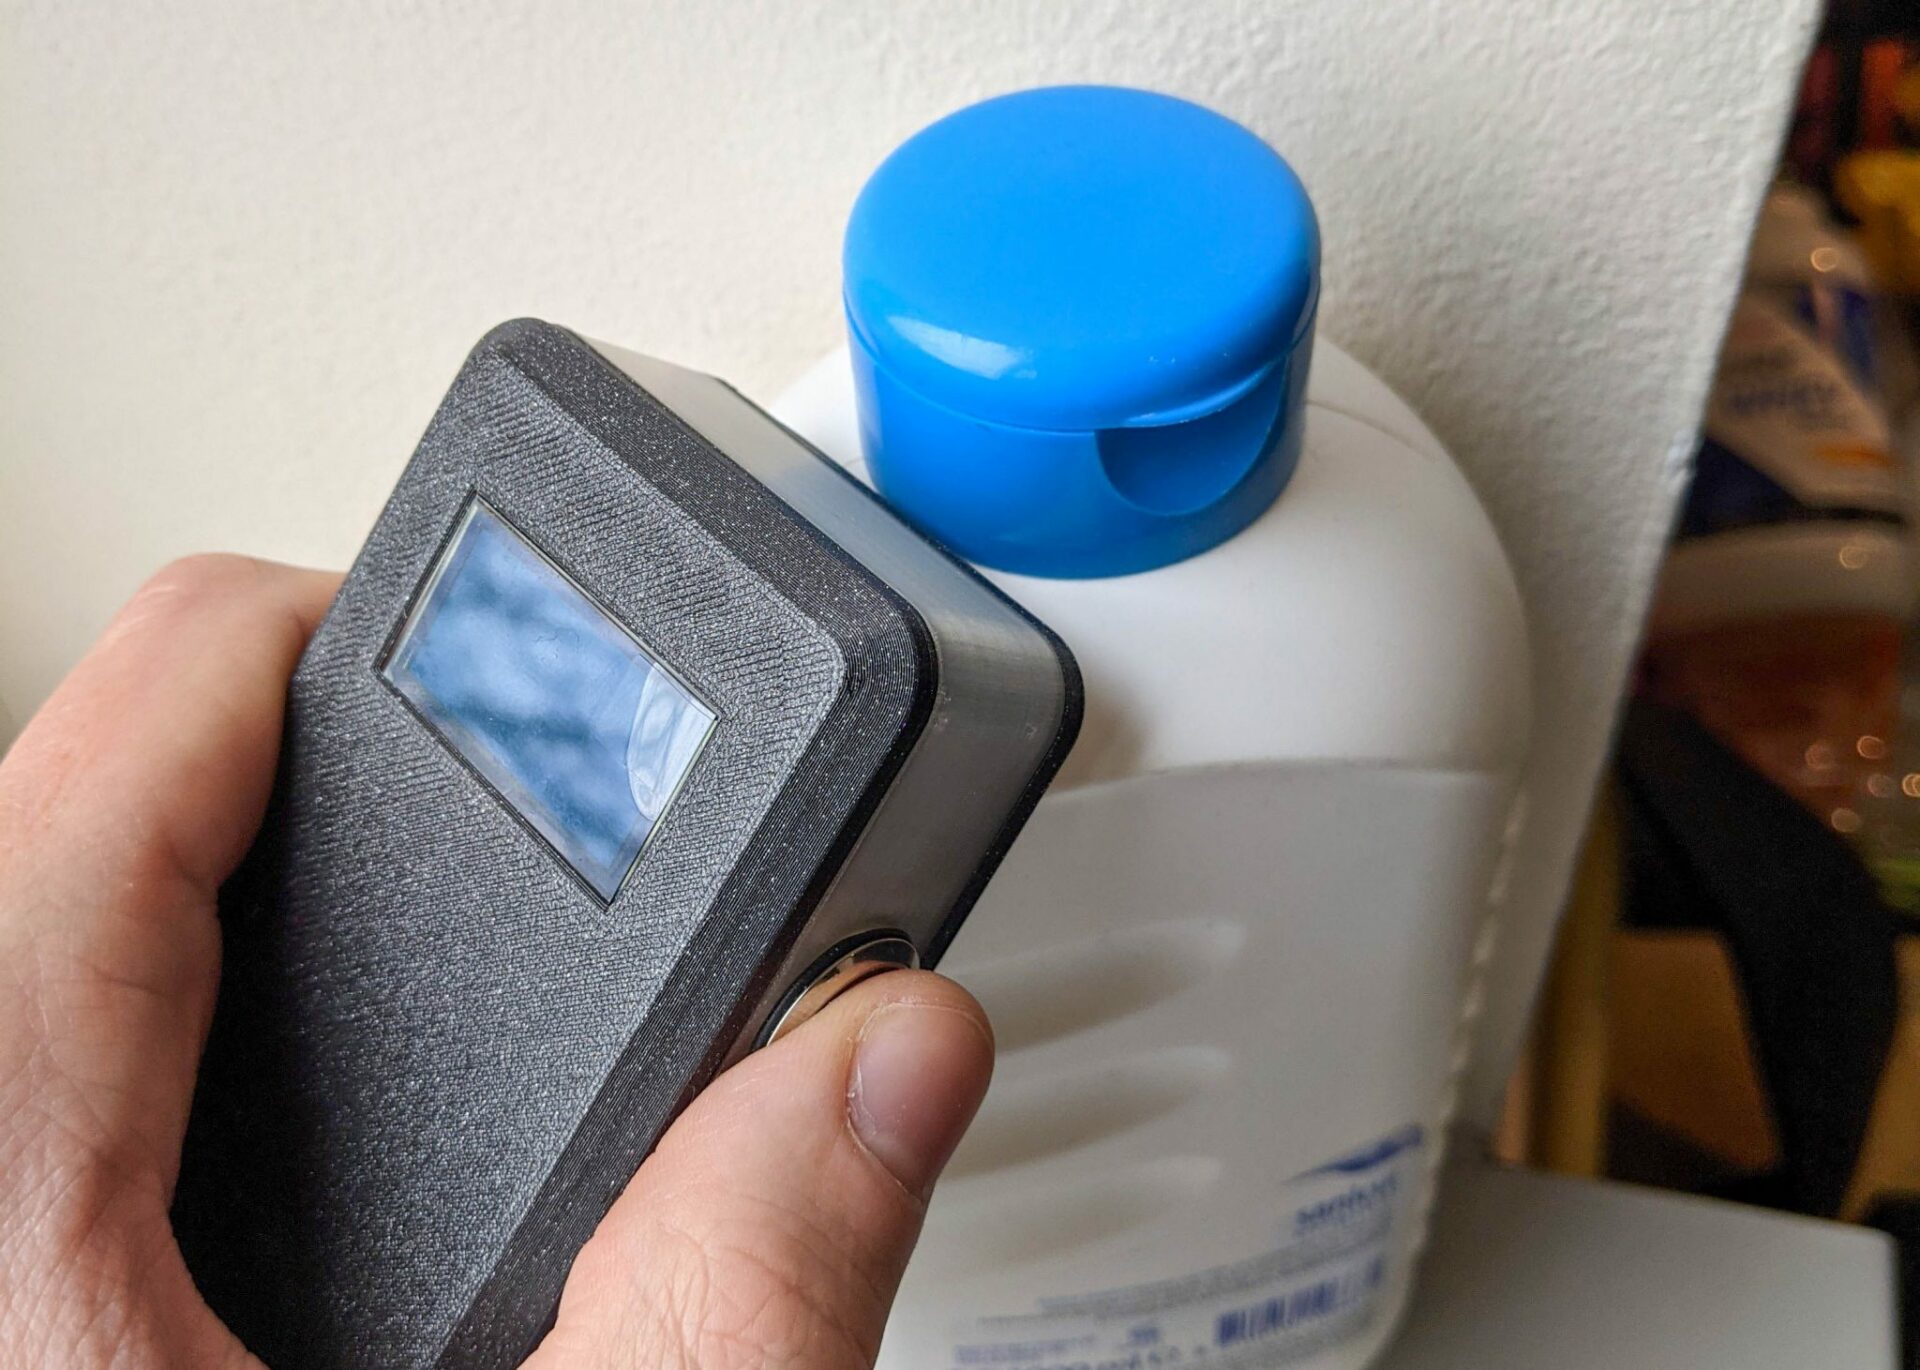 Simple handheld device that can identify the five most common plastics